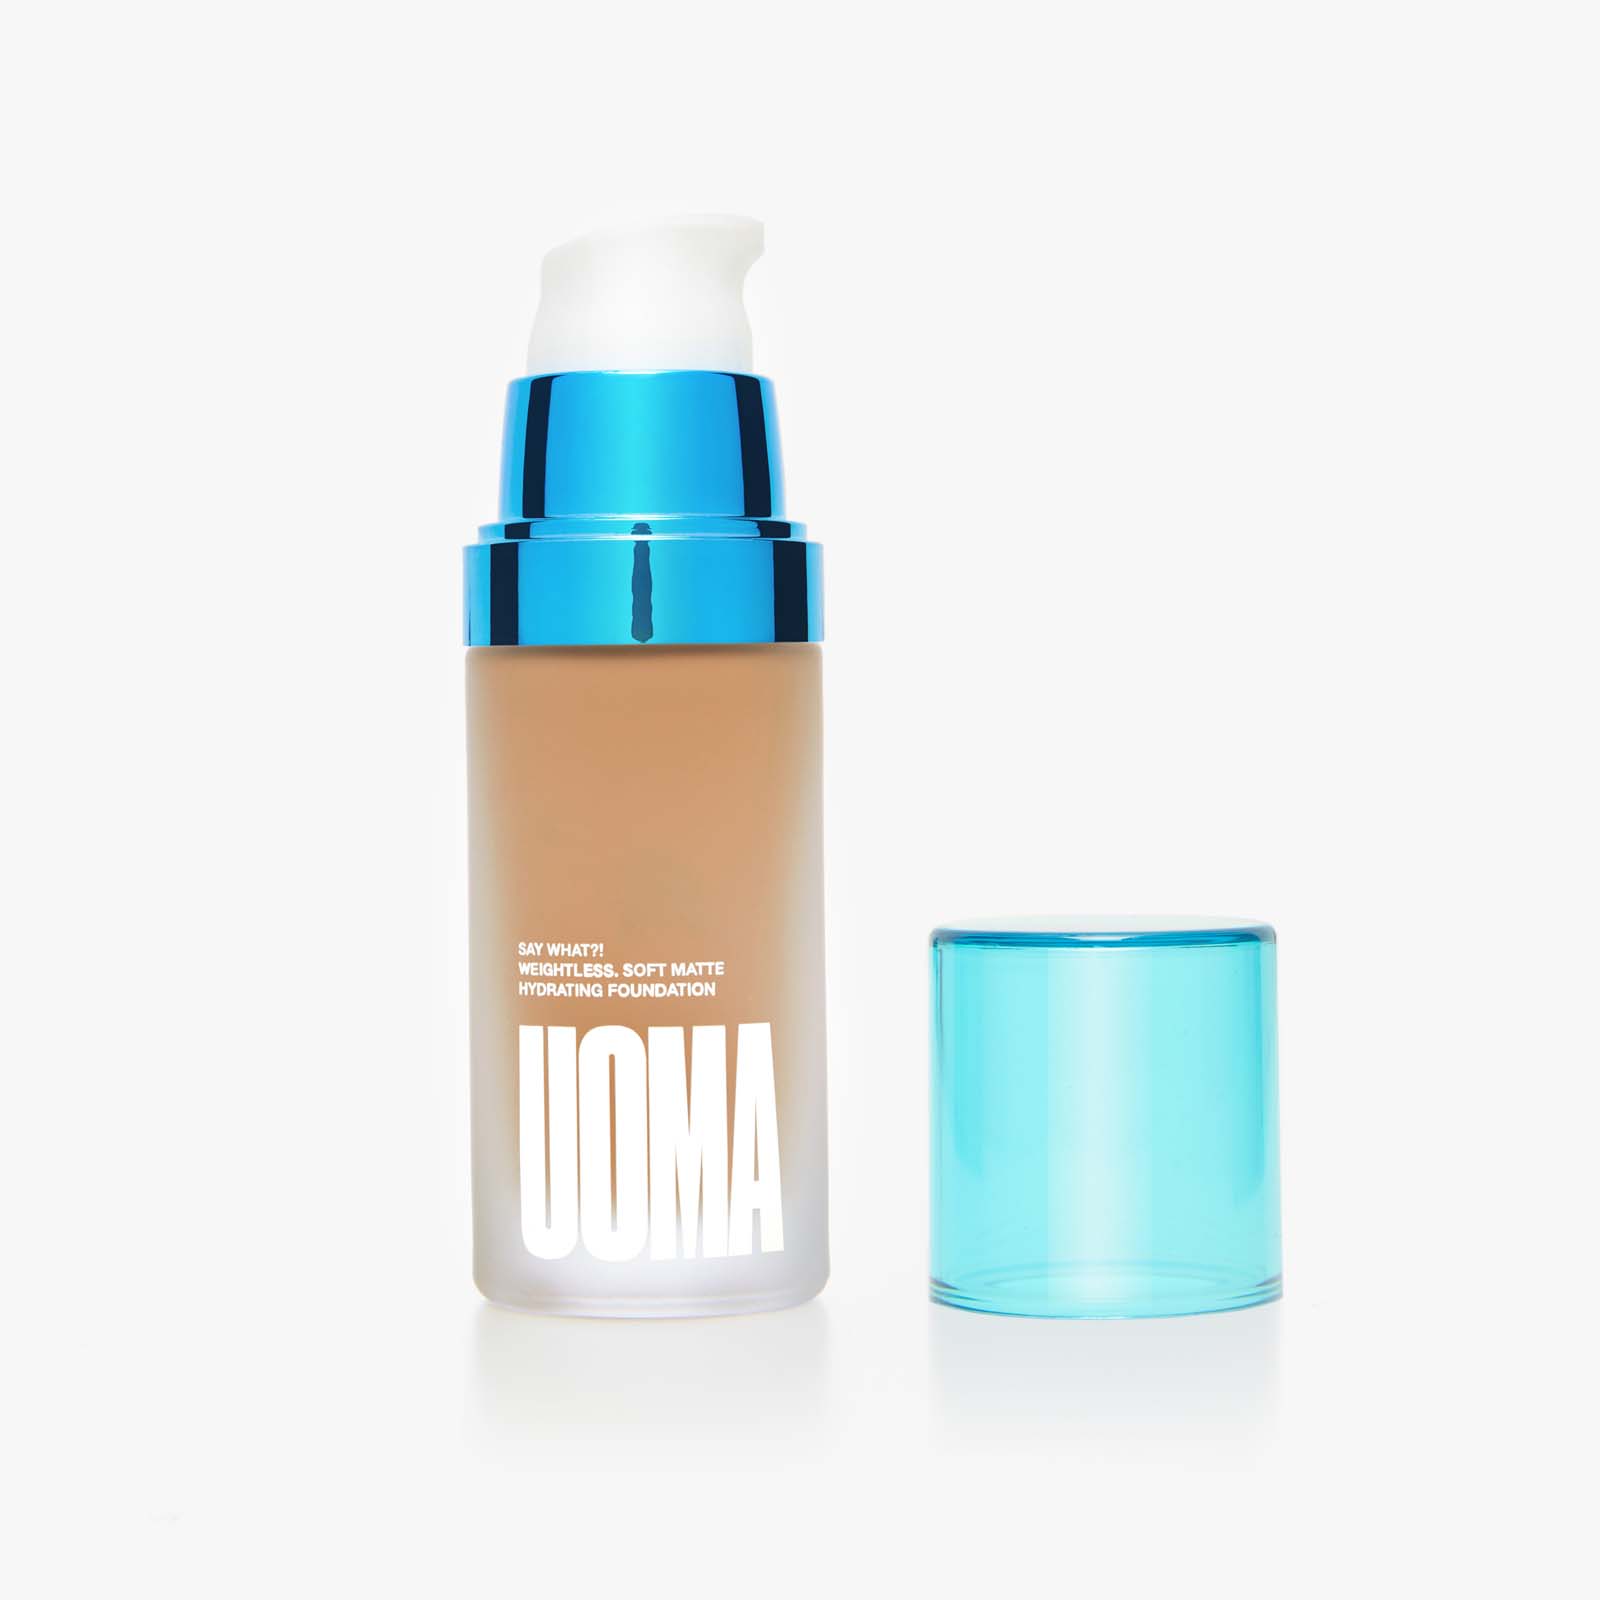 Uoma Beauty Say What?! Weightless Soft Matte Hydrating Foundation 30Ml Fair Lady T3W